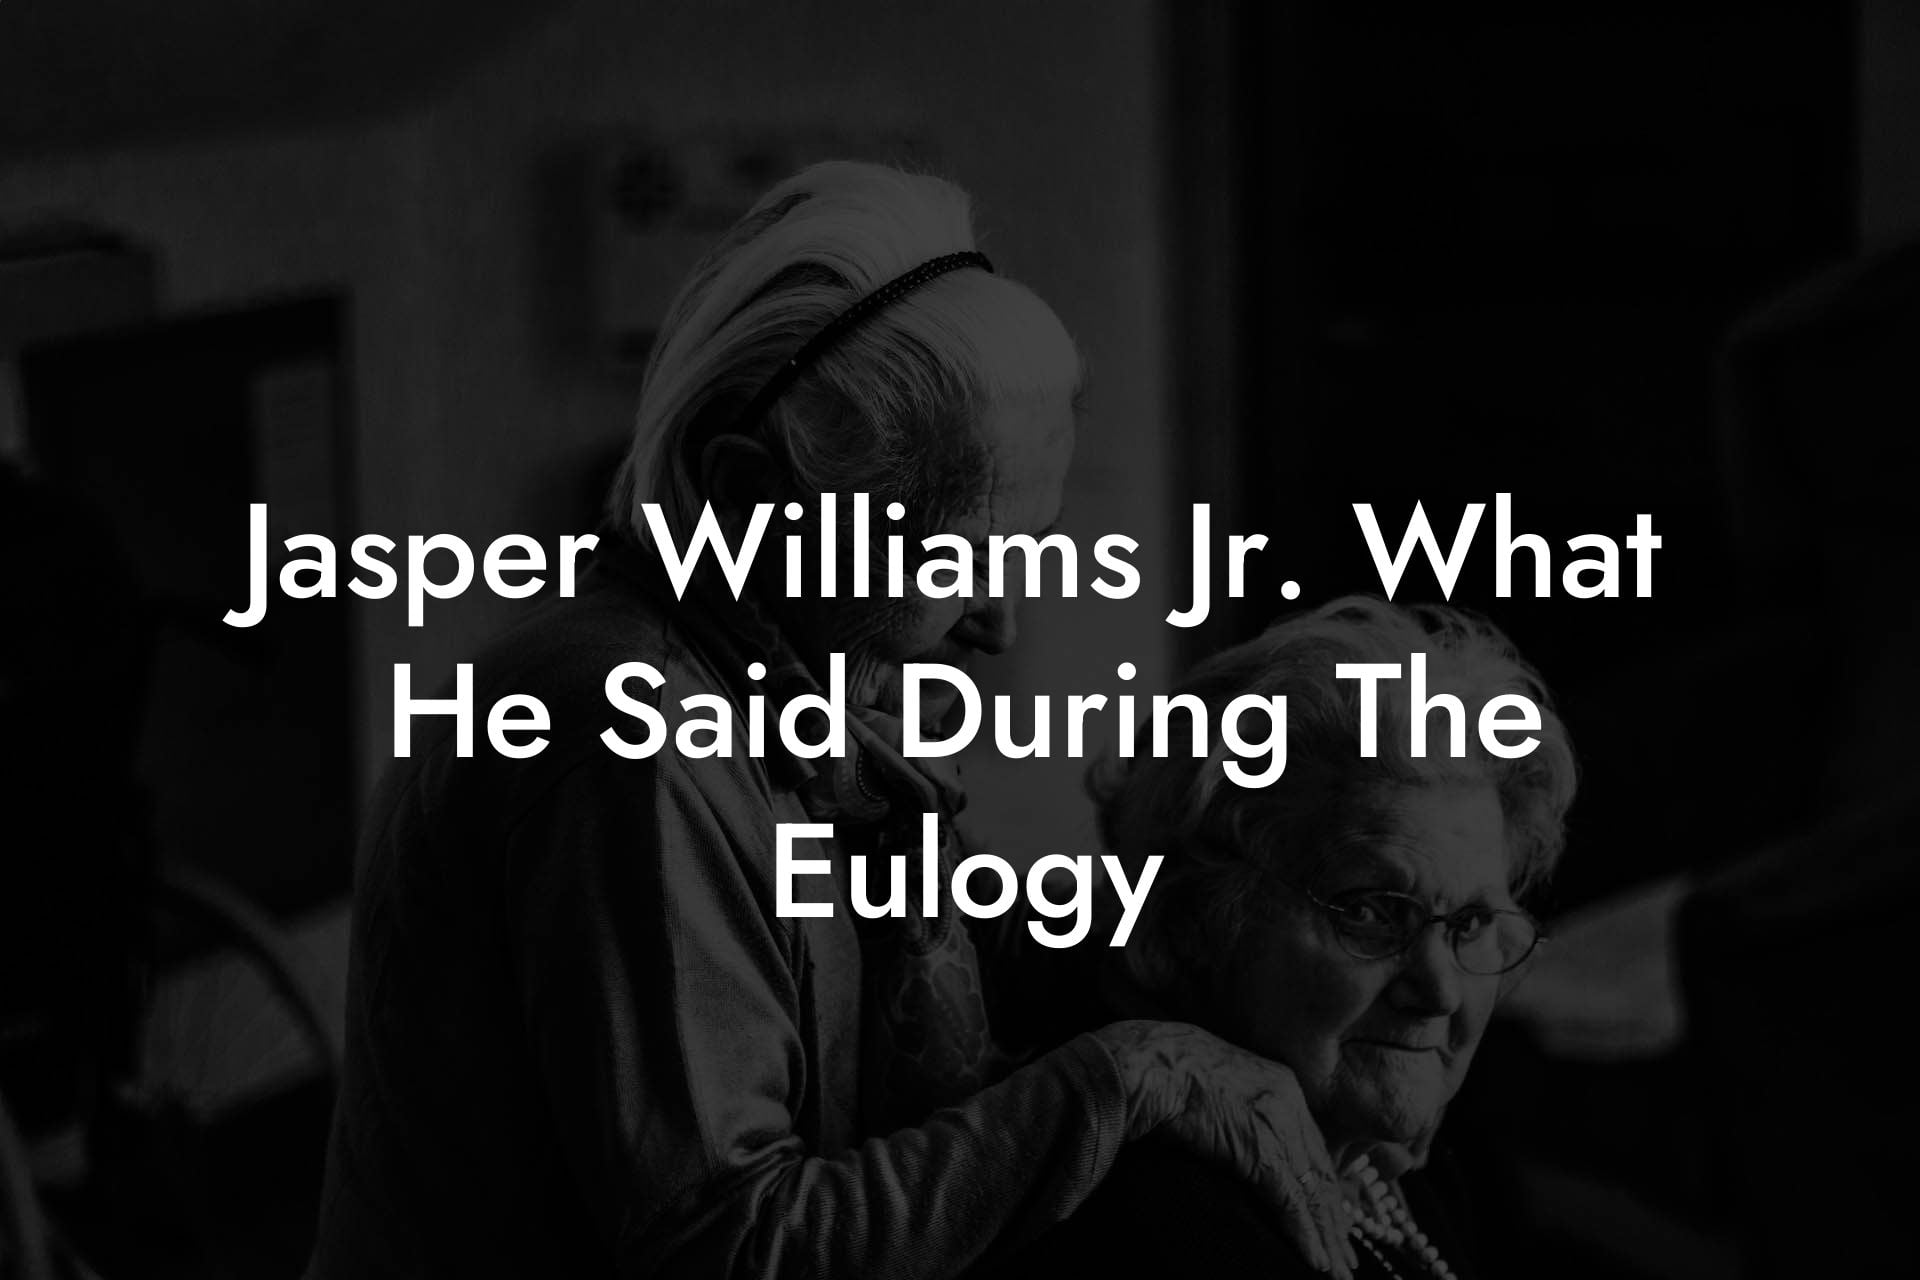 Jasper Williams Jr. What He Said During The Eulogy